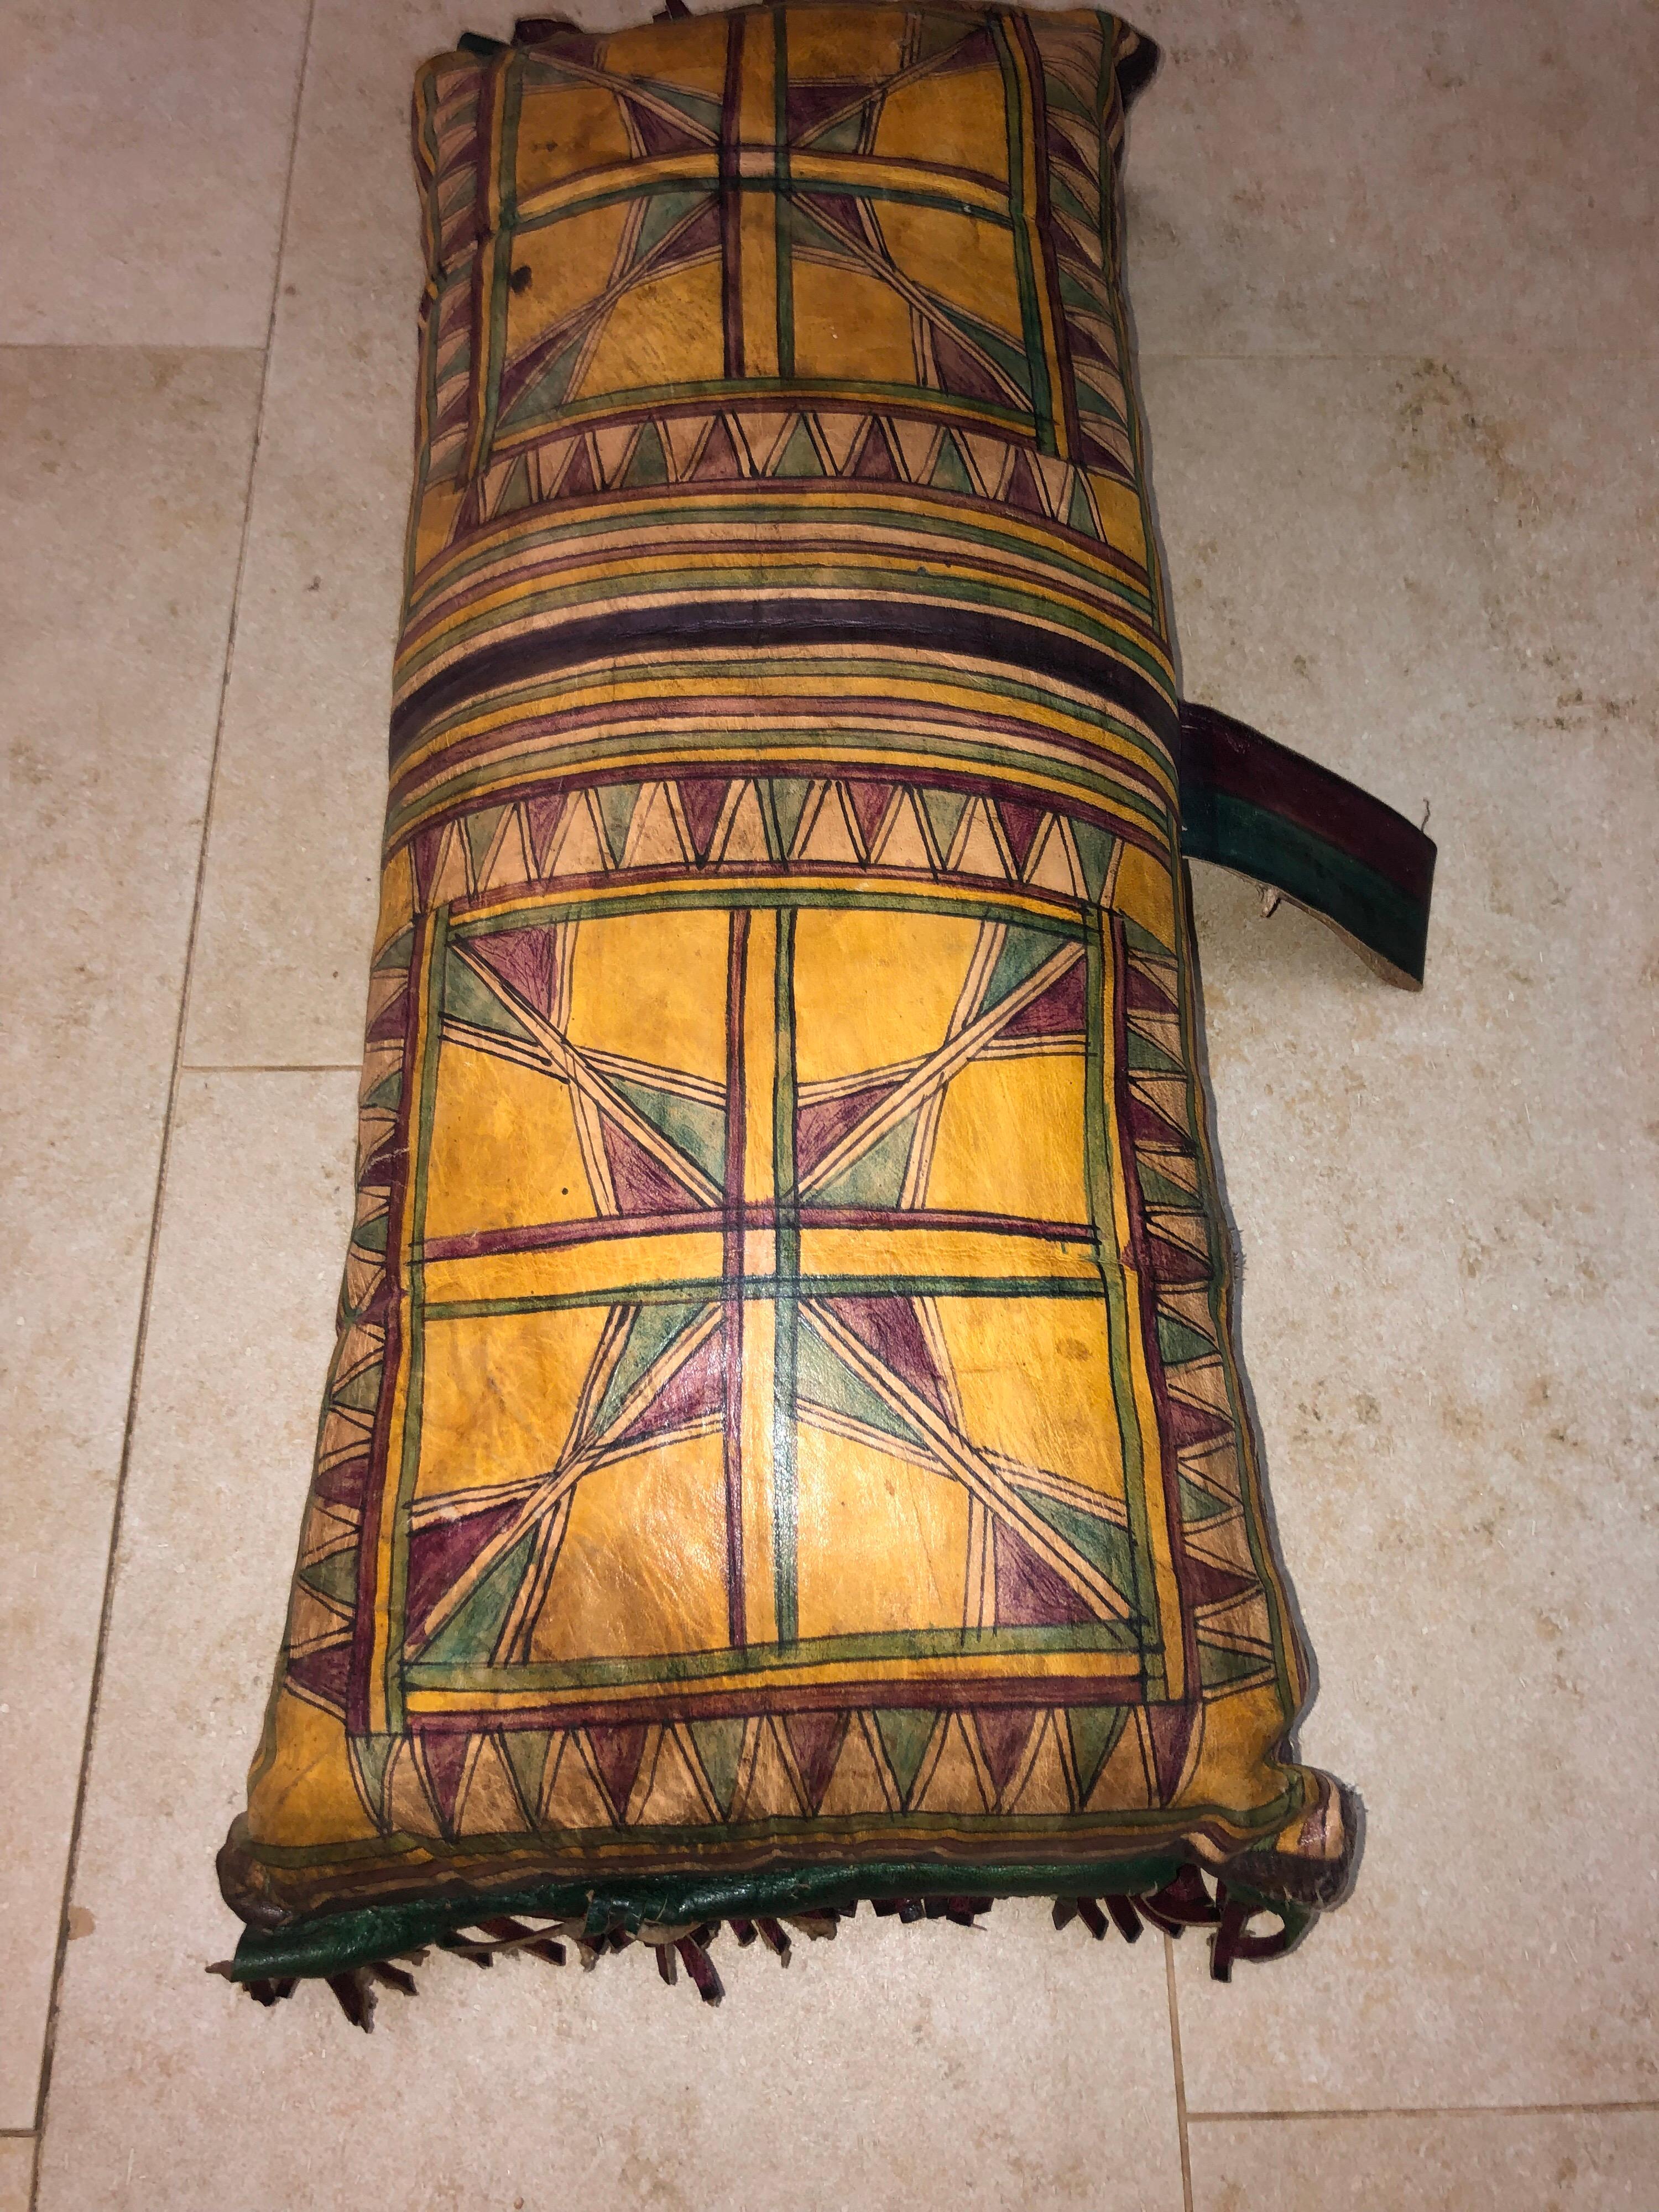 This vintage Tuareg camel saddle pillow is a stunning example of the abstract geometric art that is the hallmark of the Tuareg people. Hand-dyed using natural dyes and hand painted, this sturdy leather pillow is fully decorated on both sides with